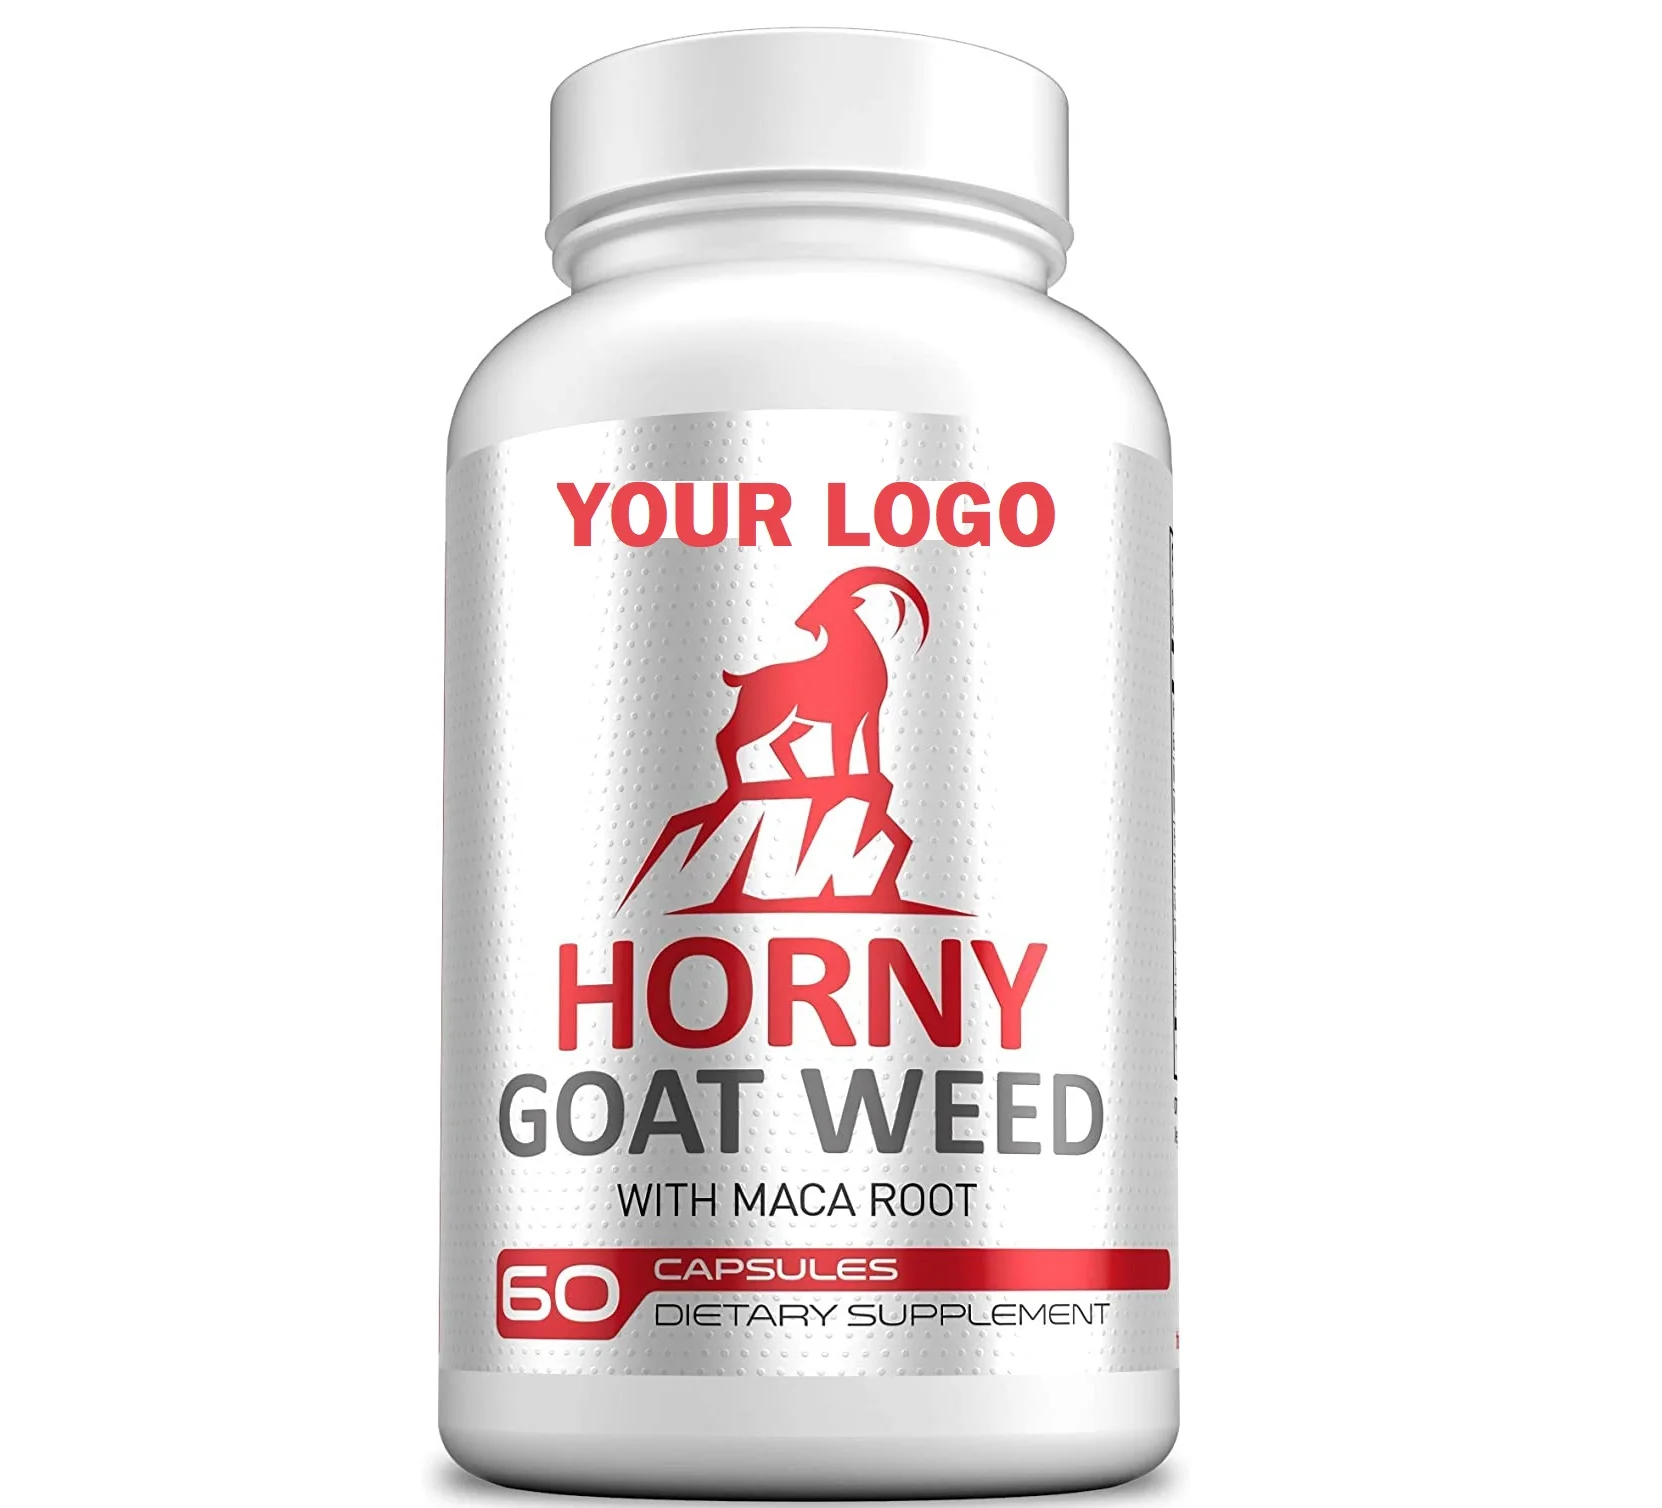 Radiance horny goat weed